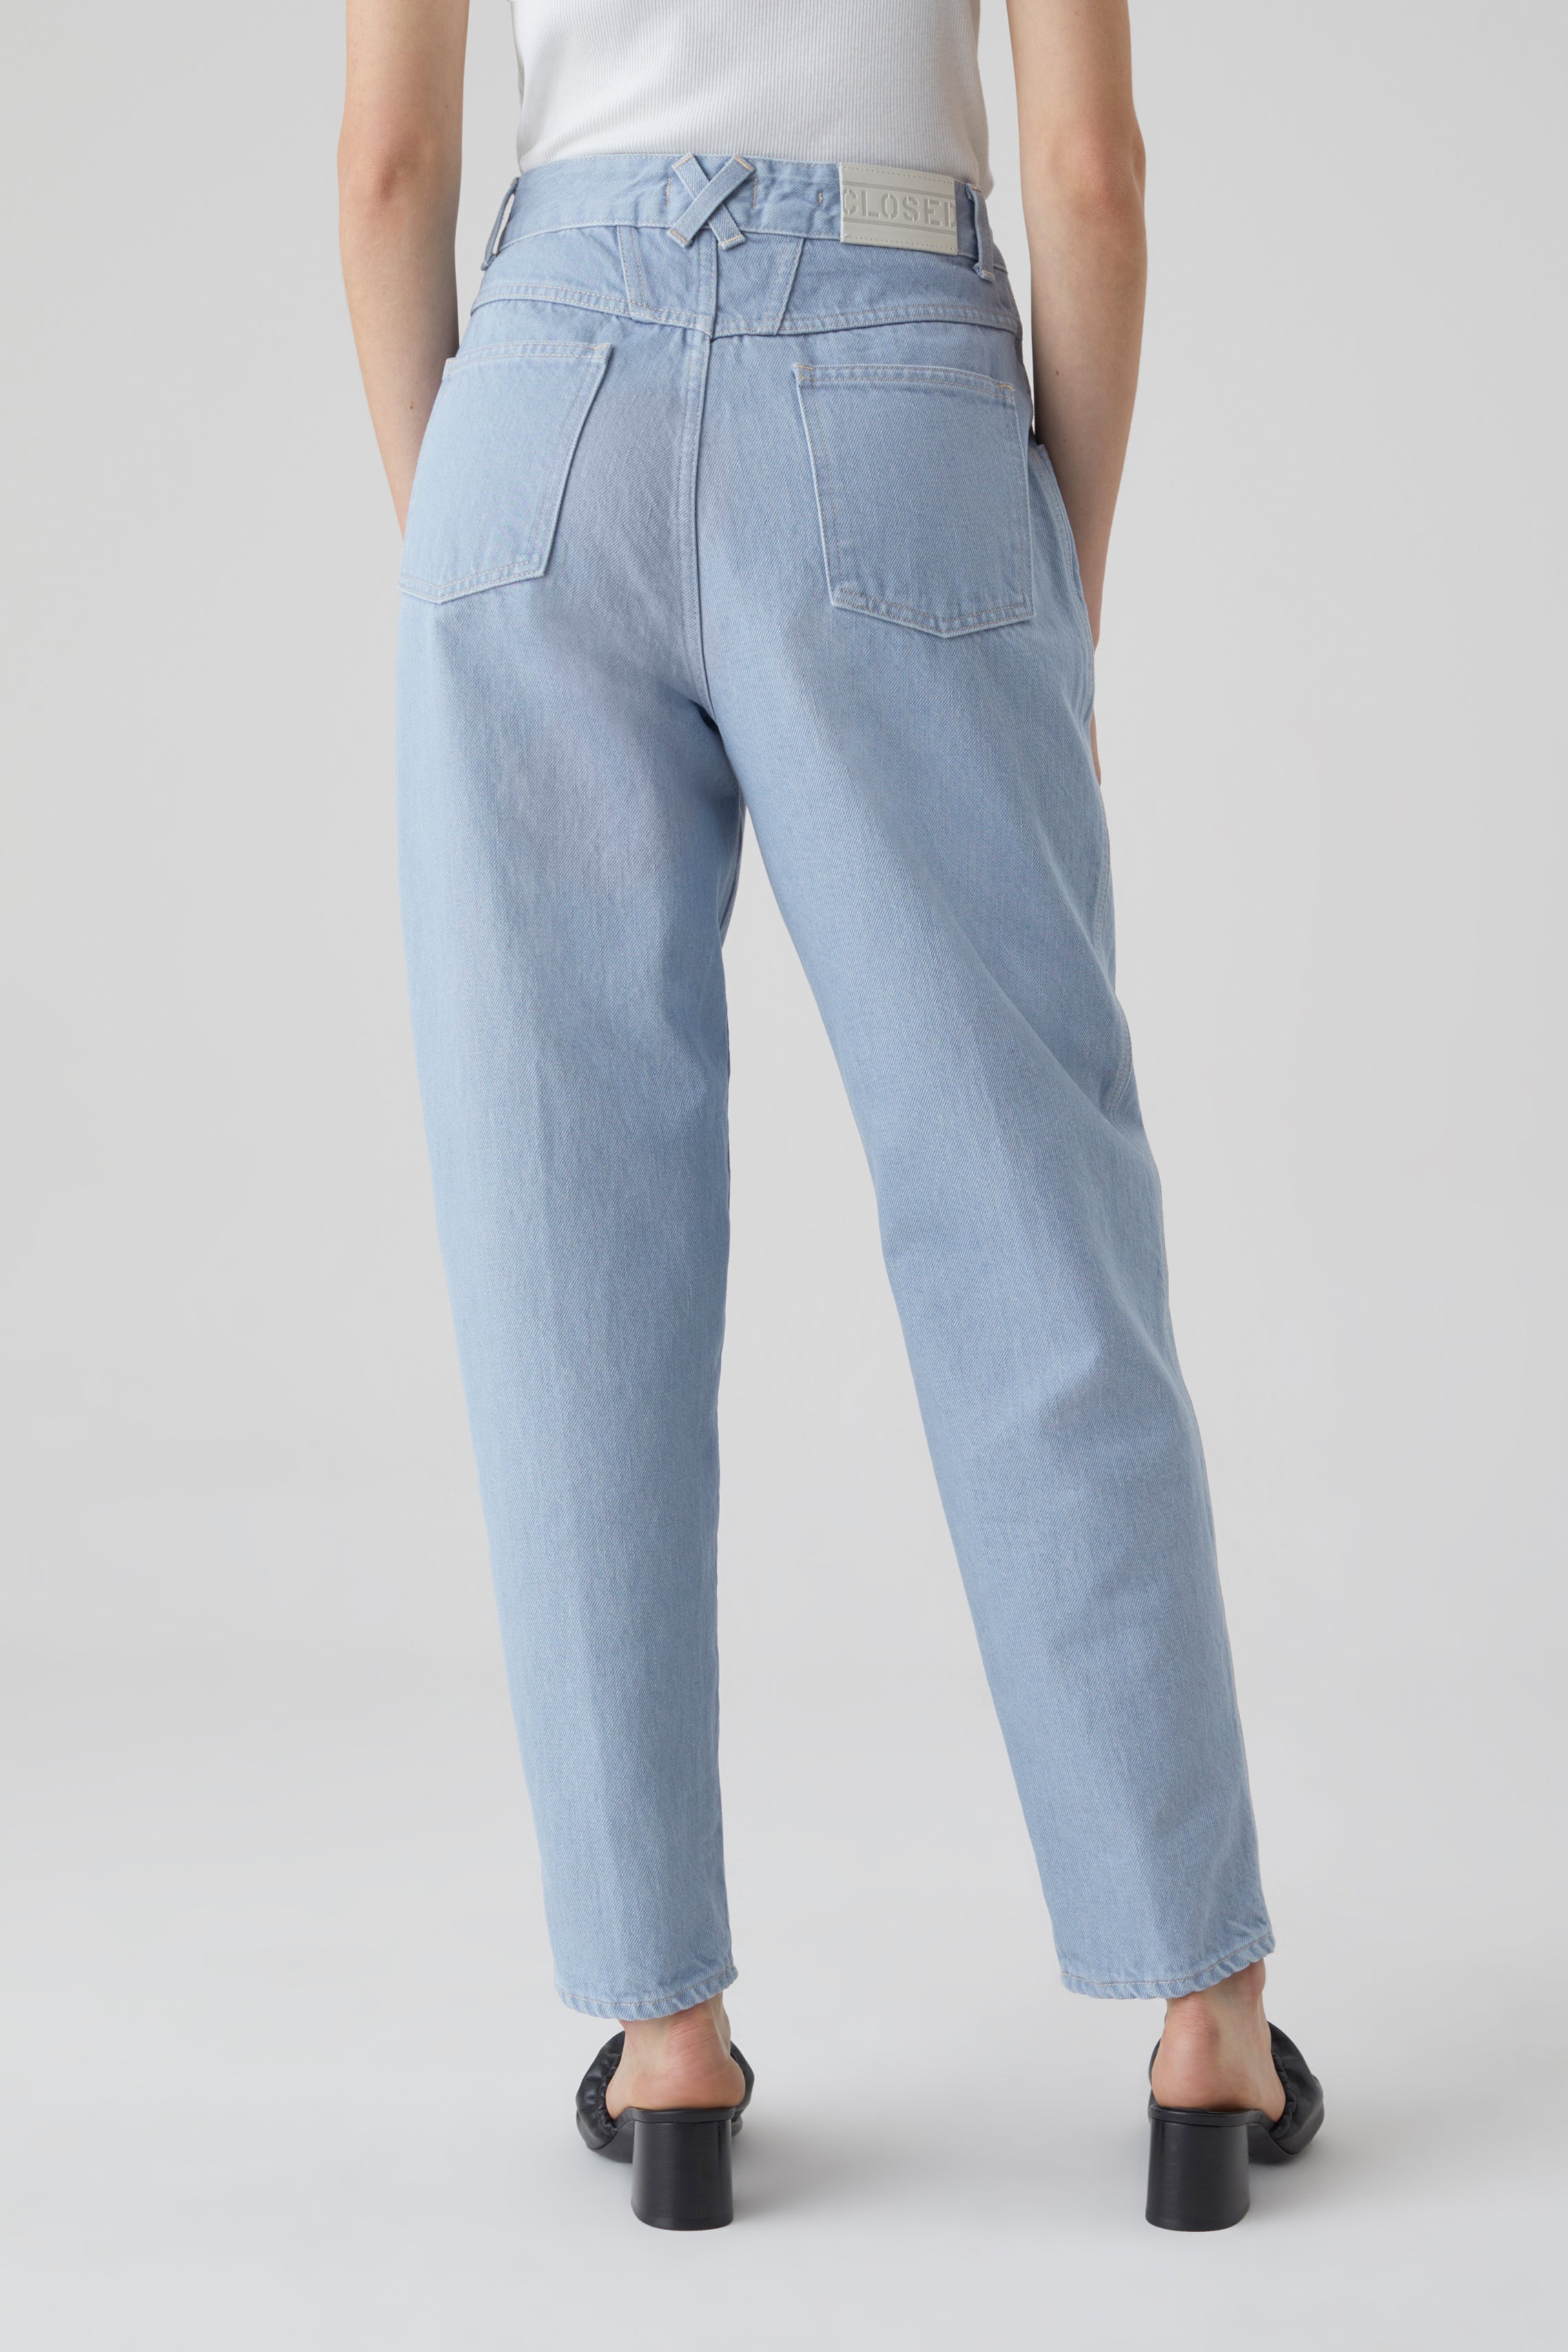 STYLE NAME PEARL JEANS